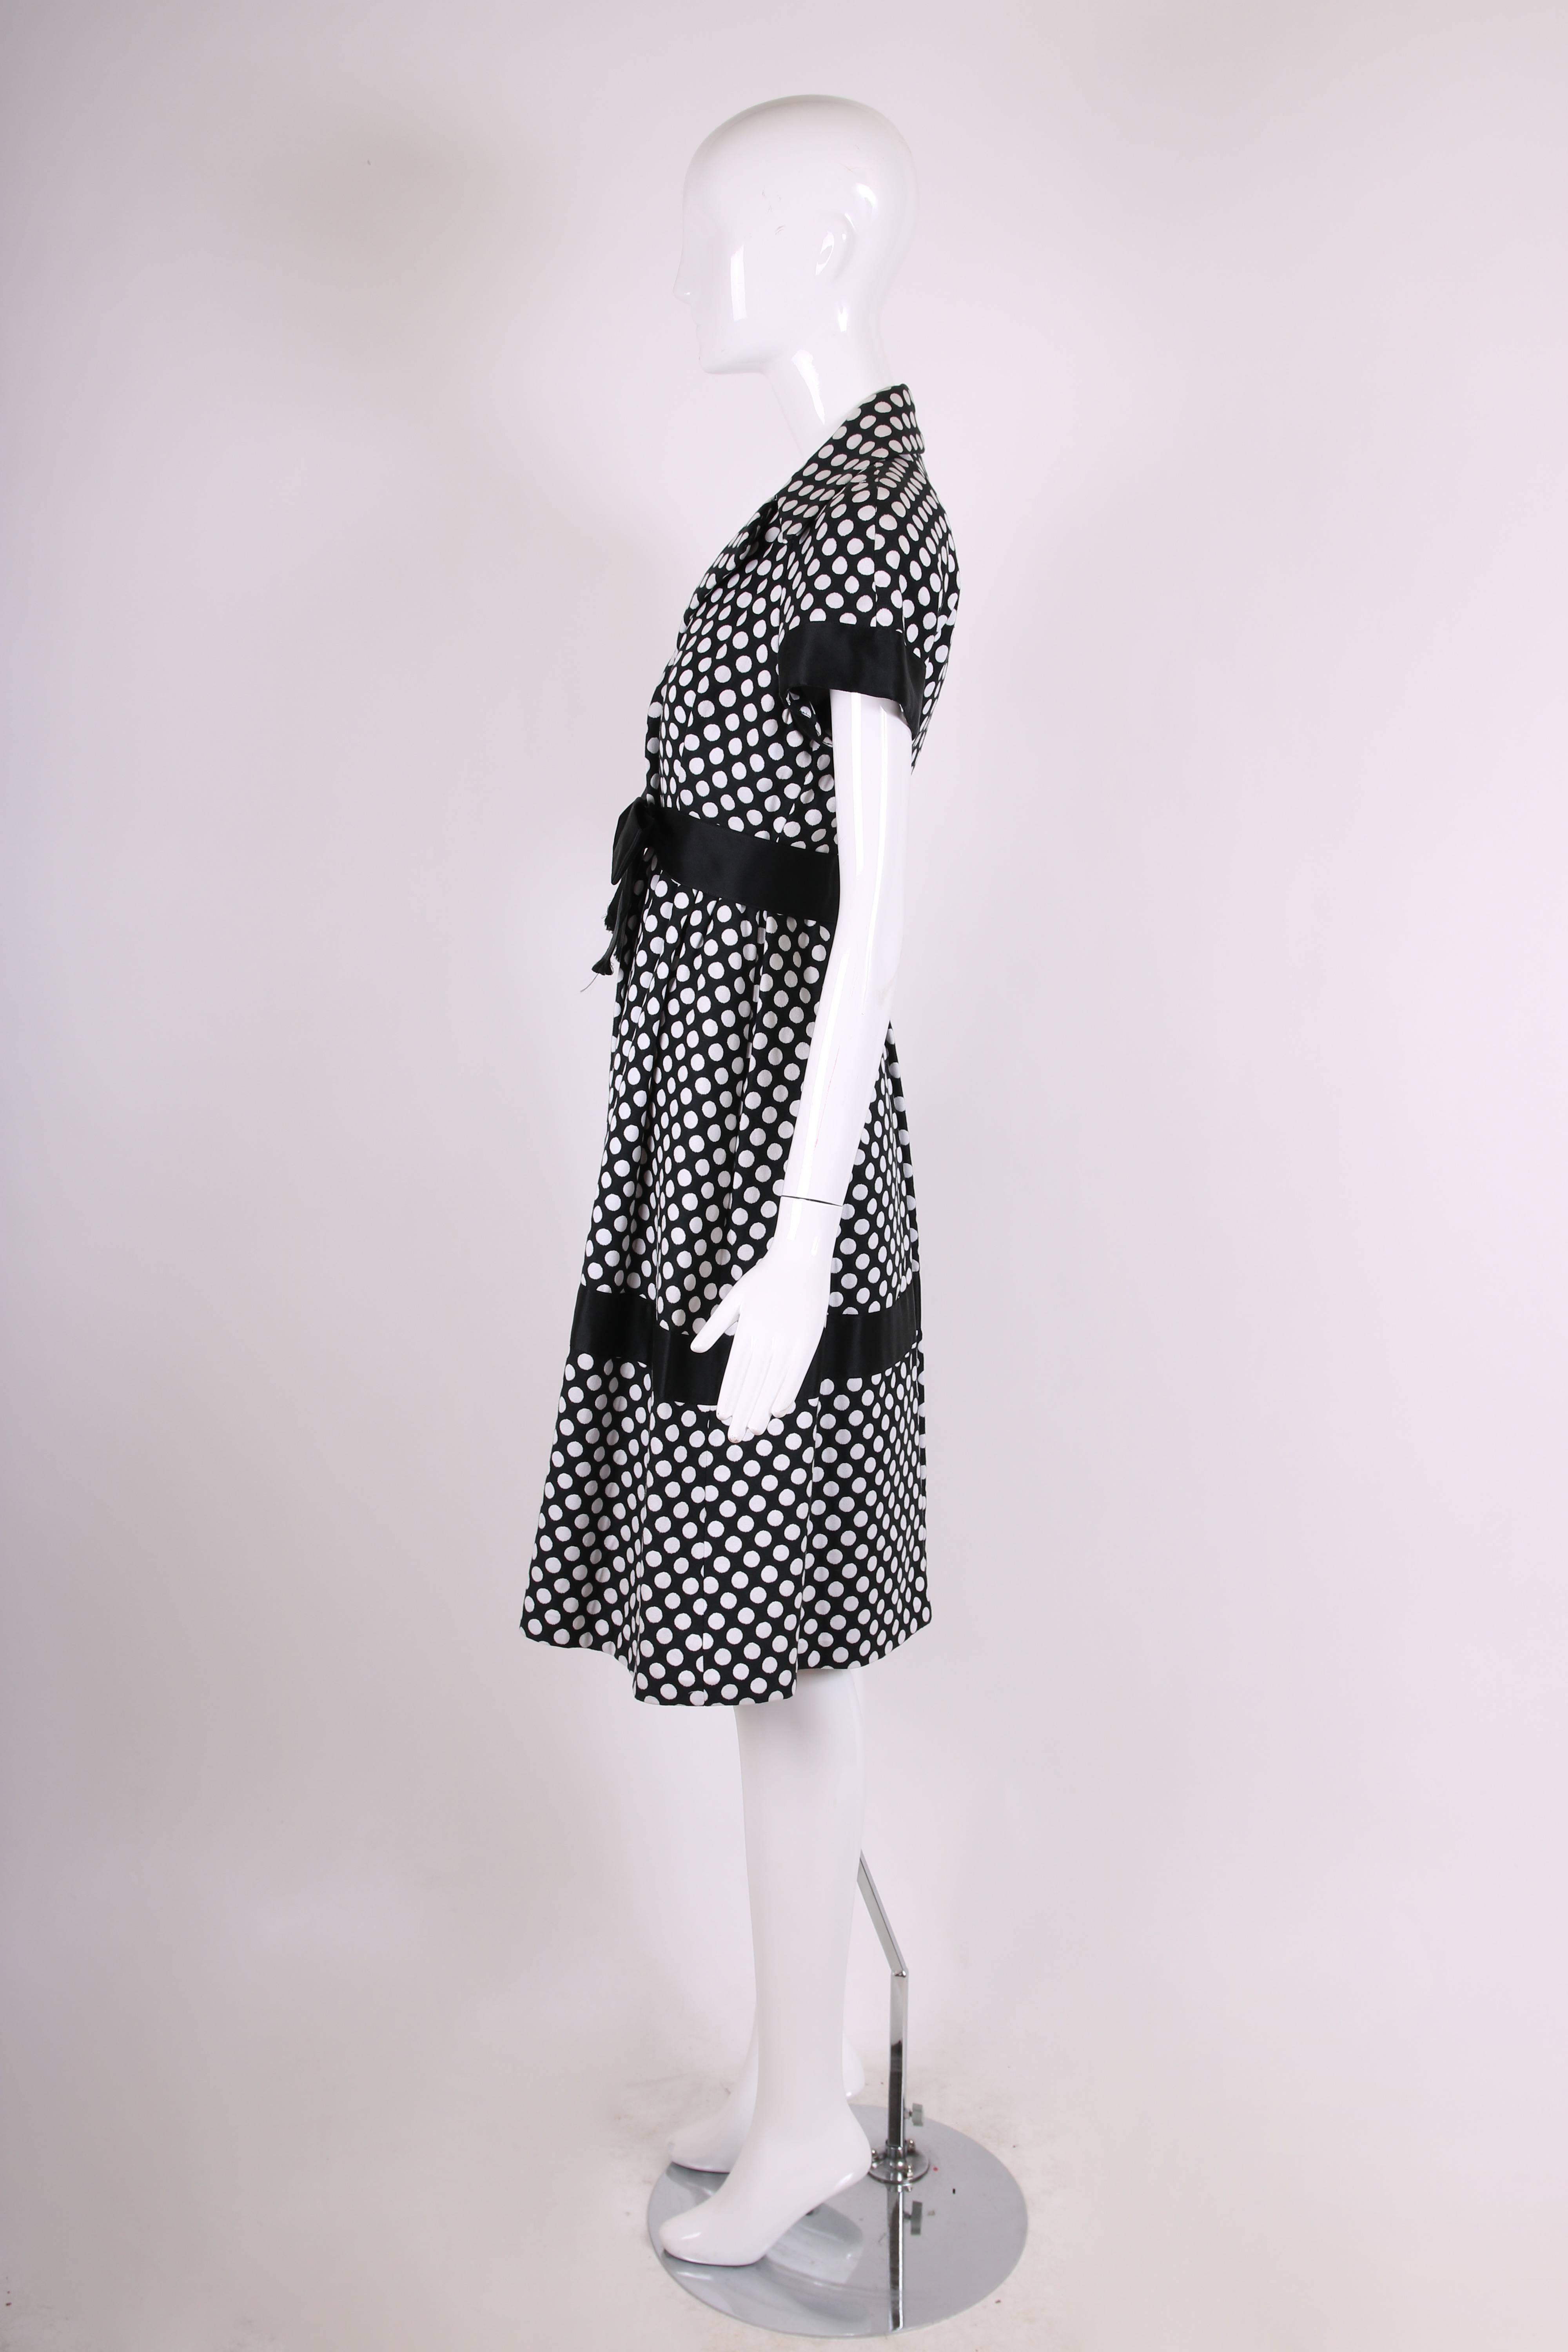 Women's Geoffrey Beene Black and White Polka Dot Day Dress with Satin Bow, 1960s 